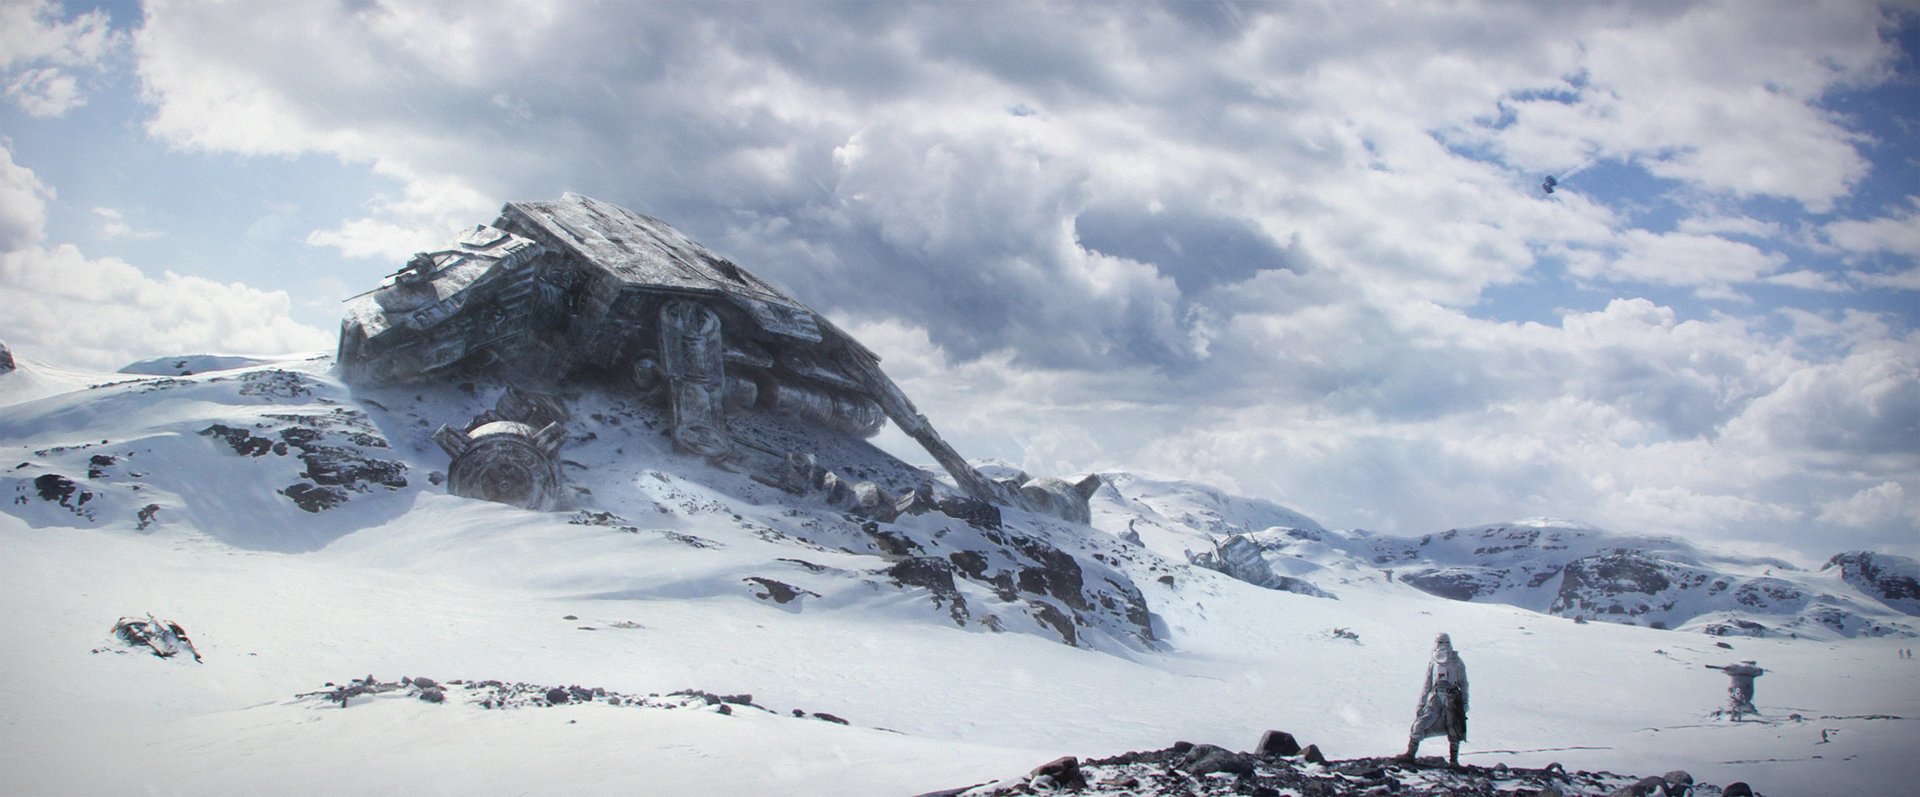 Hoth Star Wars HD Wallpaper Background Image